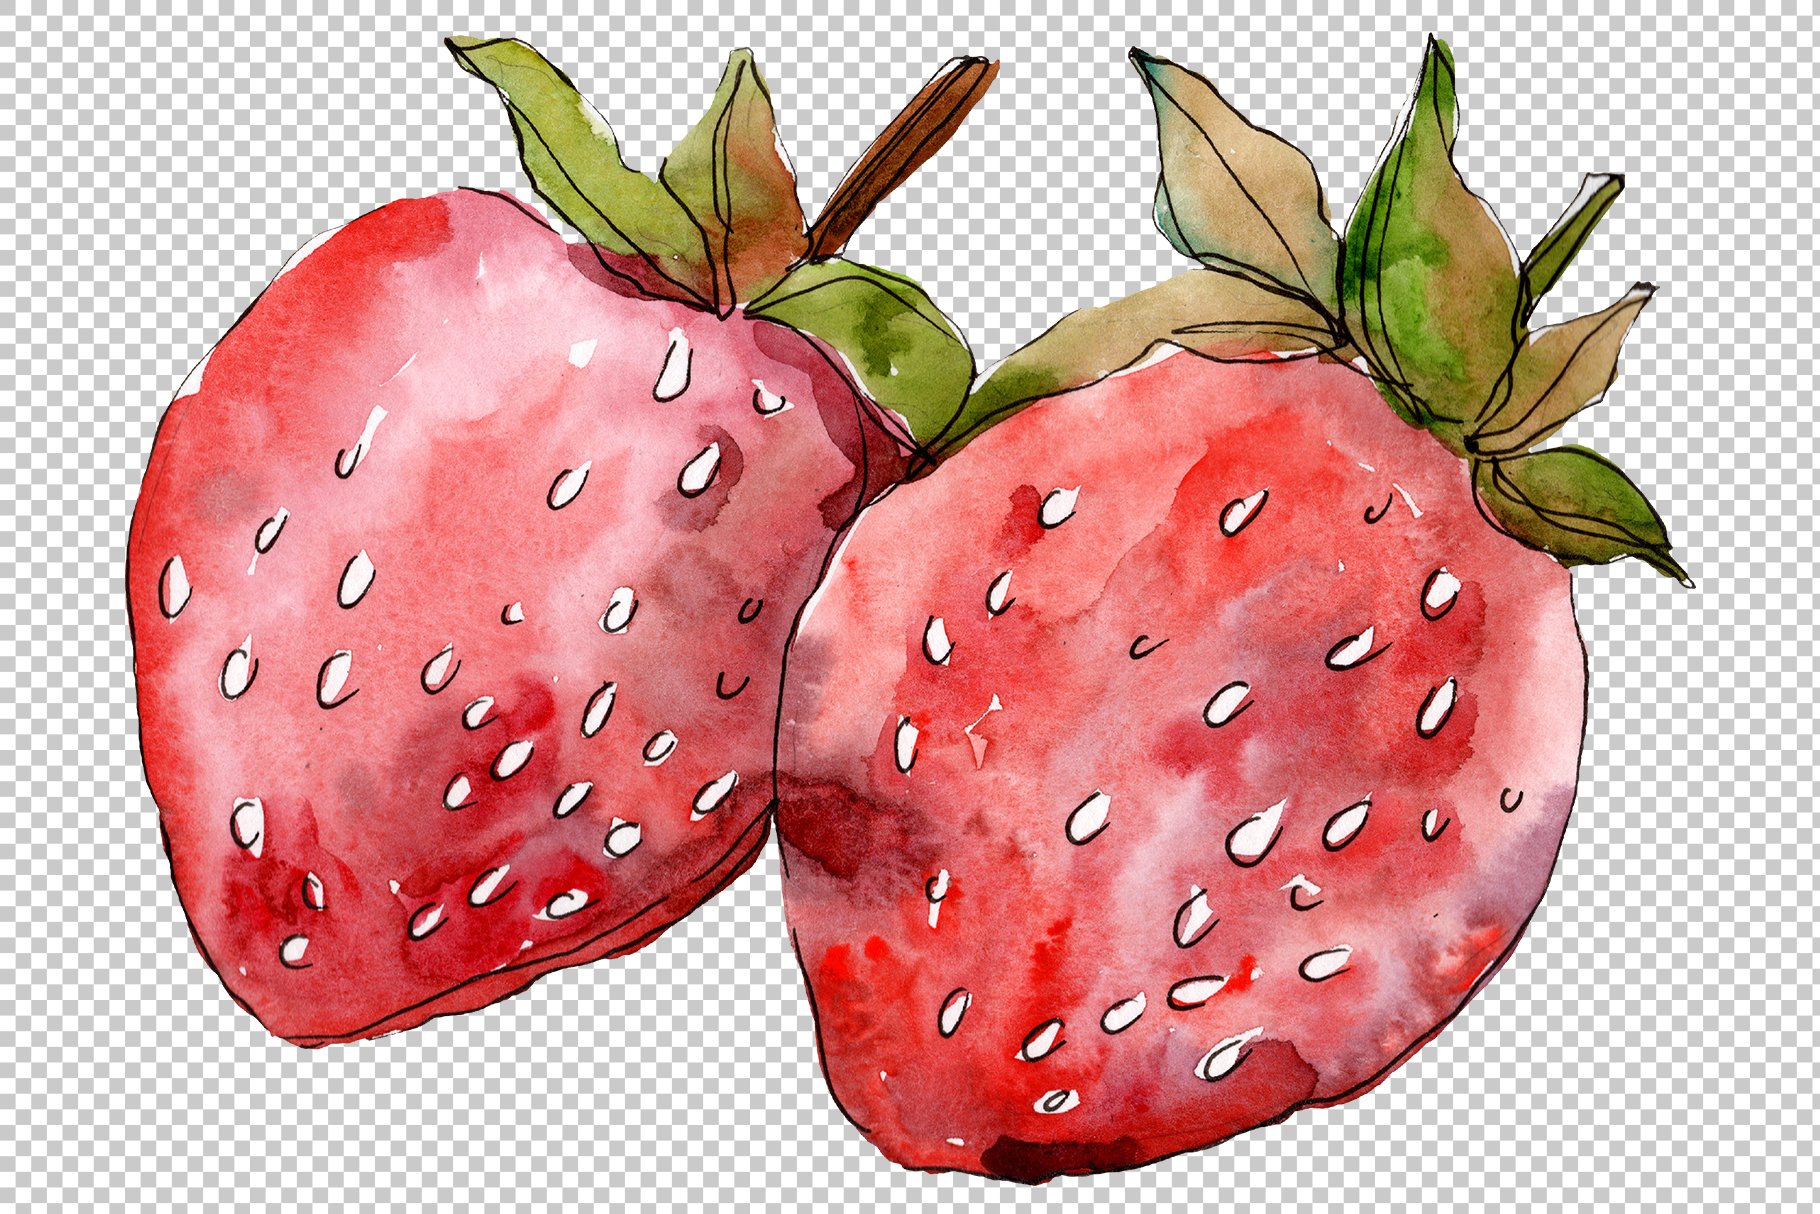 Transparent background with the two watercolor strawberries.